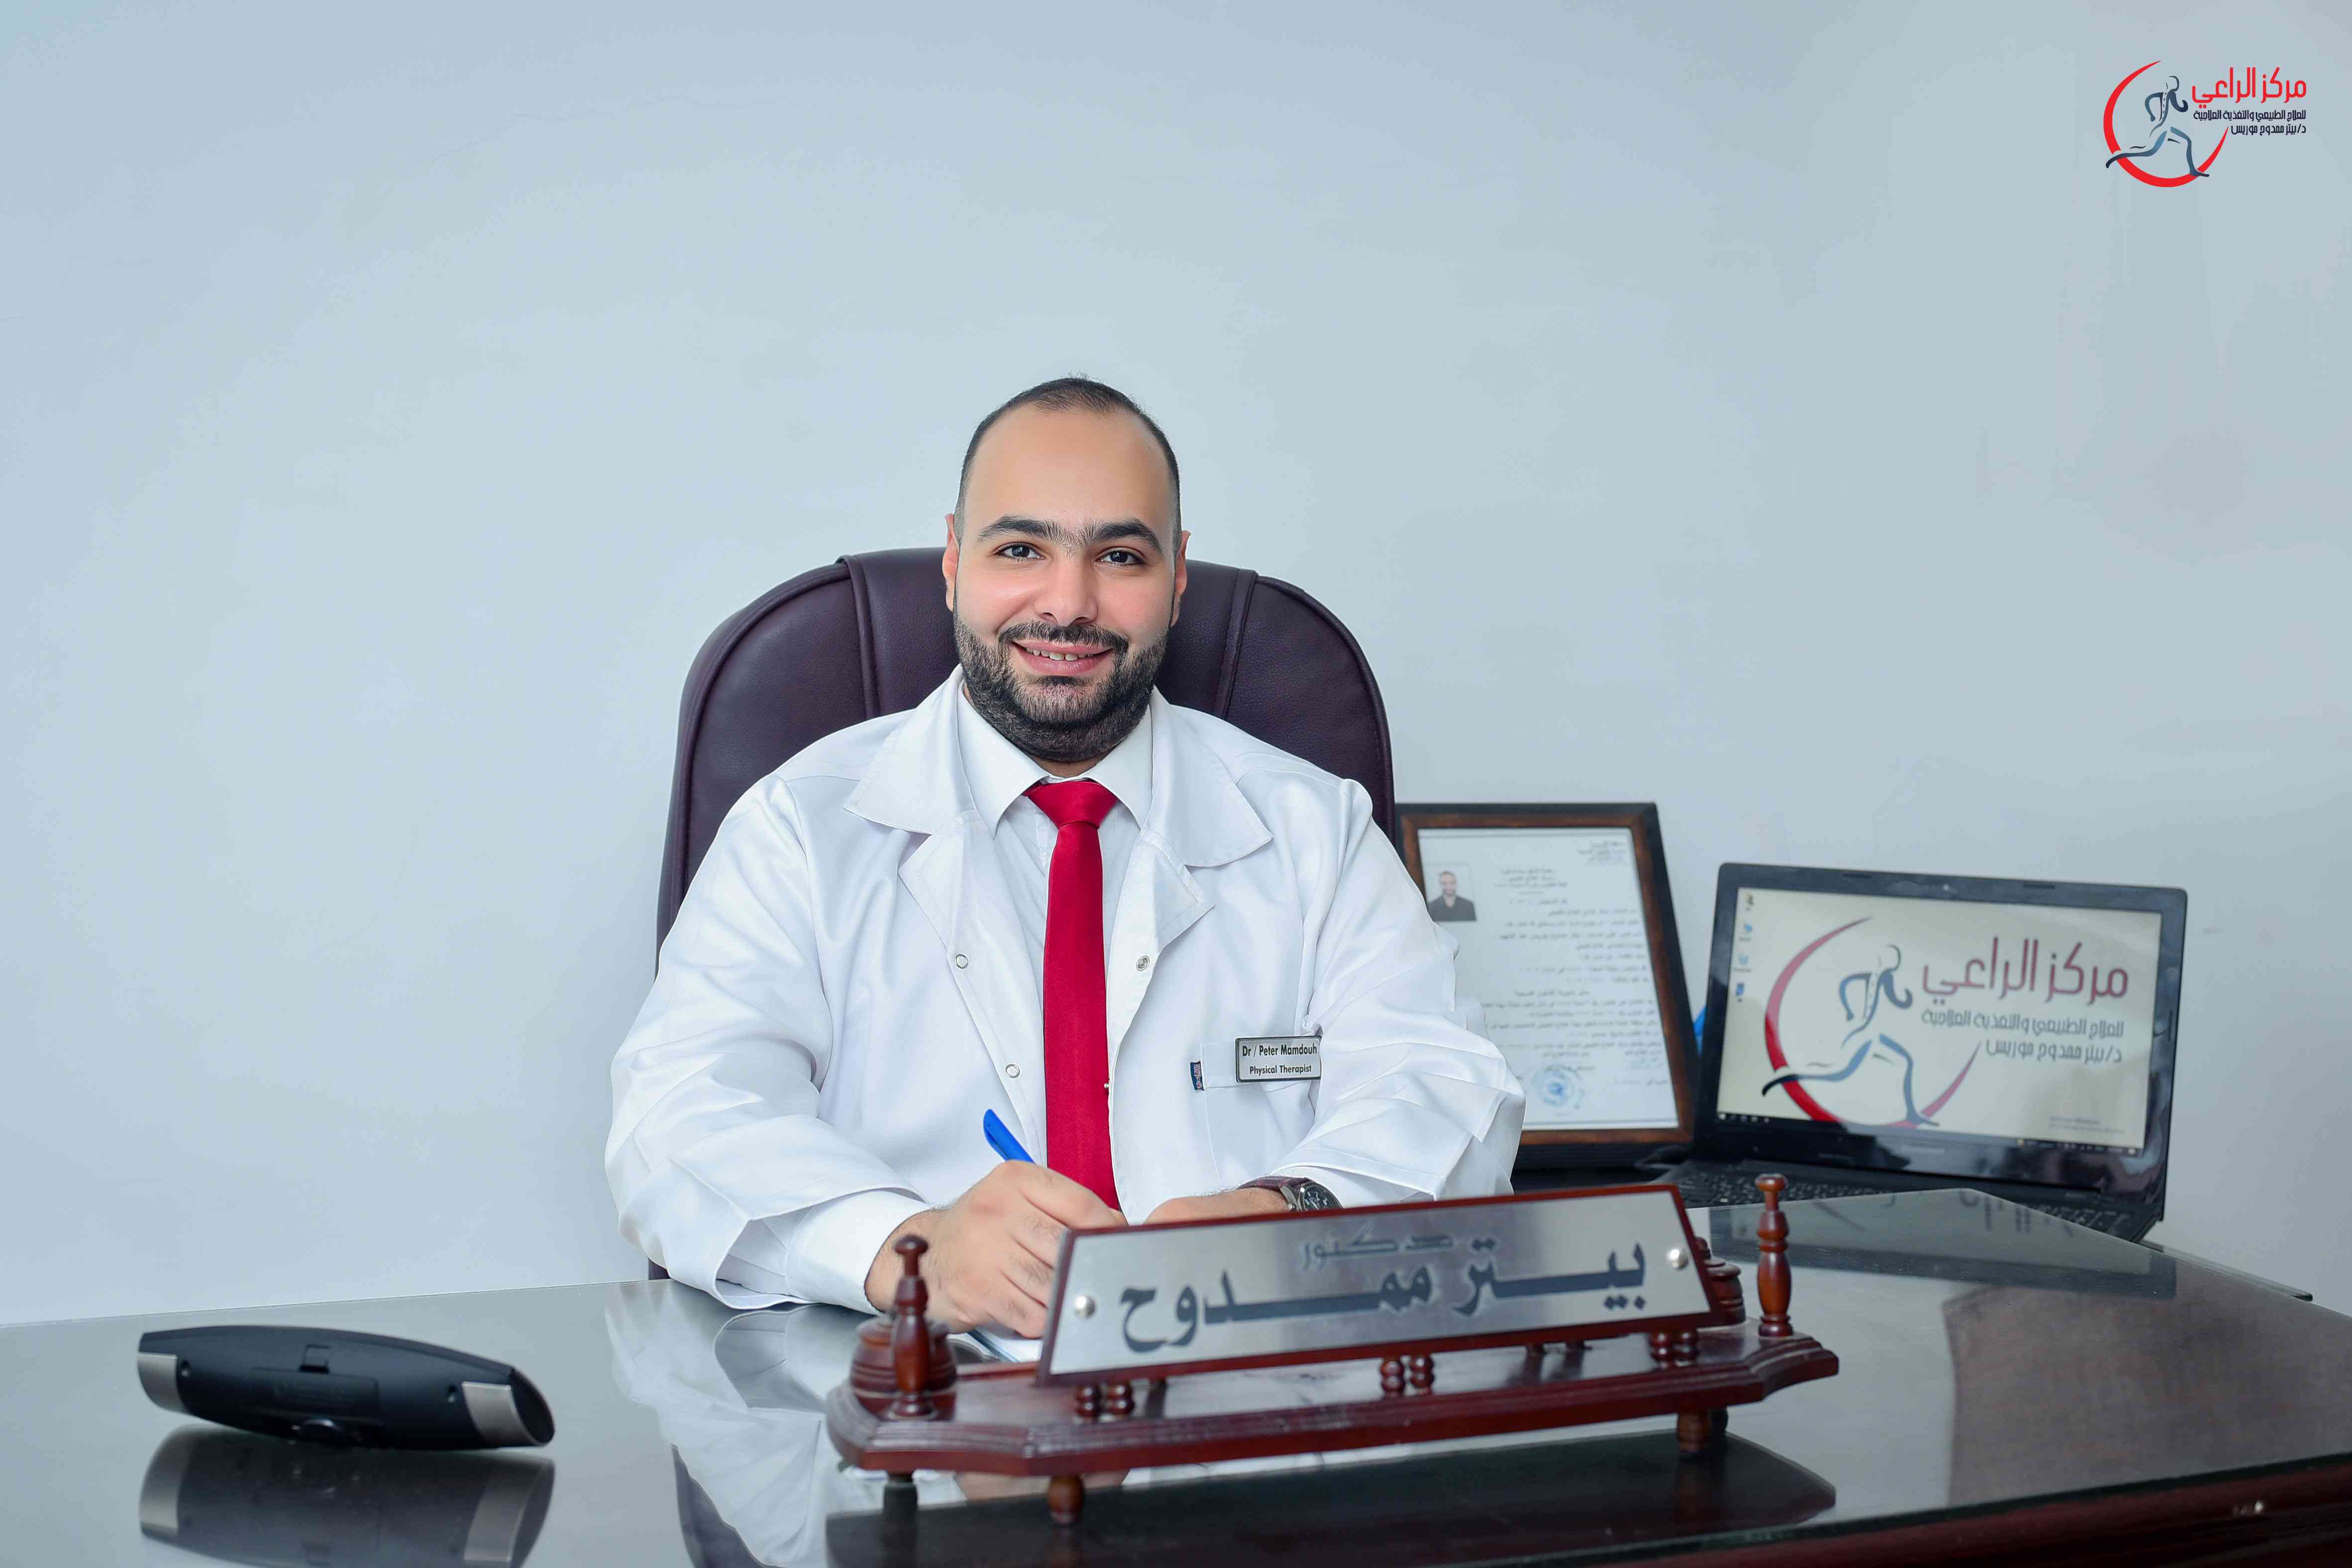 Dr. Peter Mamdouh